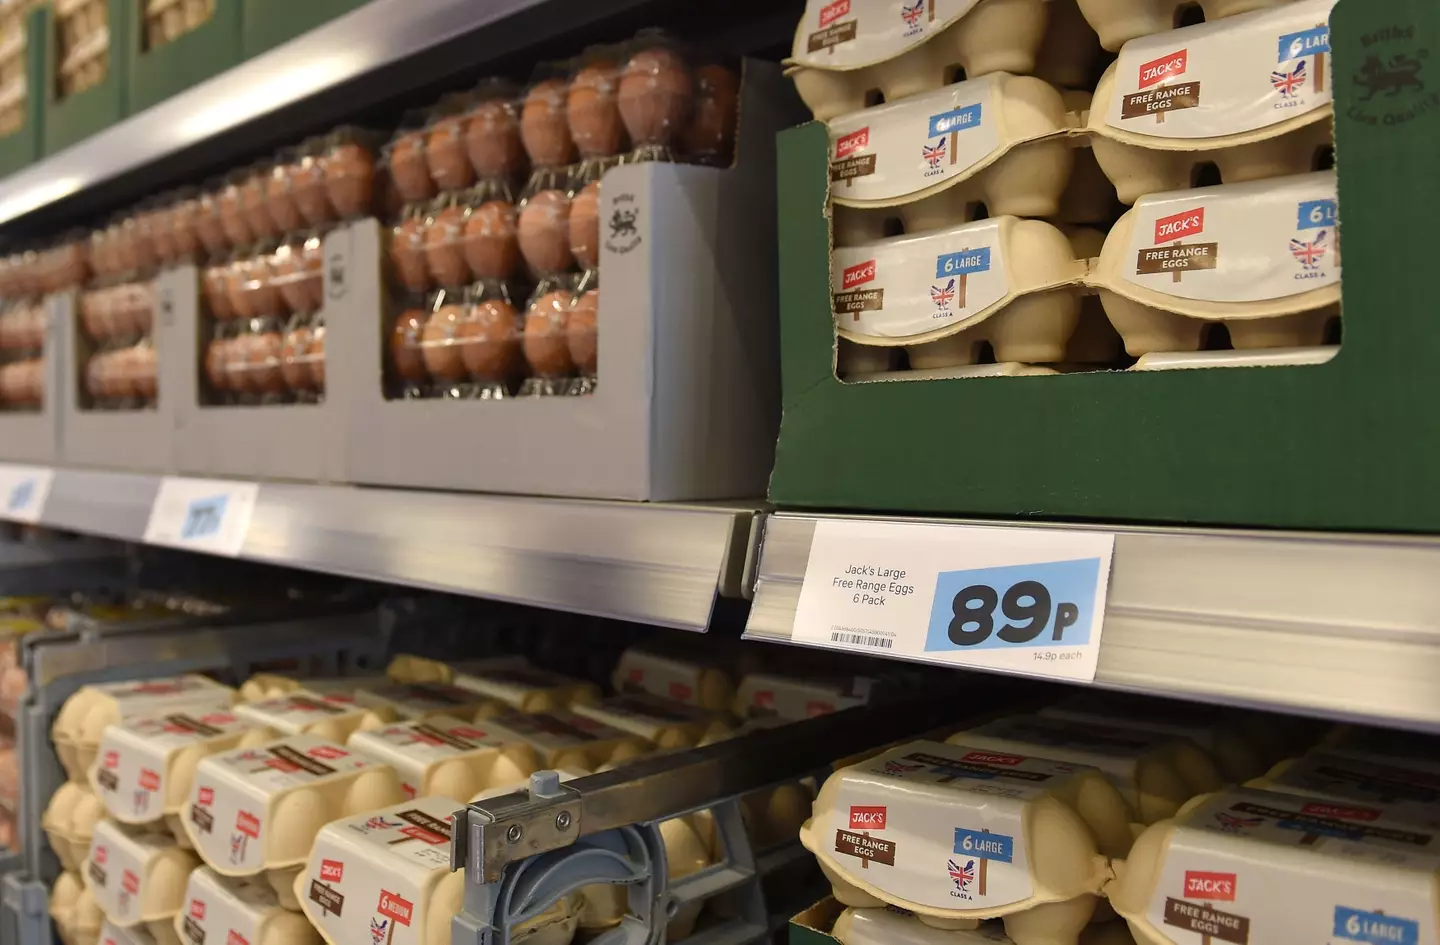 There is a shortage of eggs in UK supermarkets.